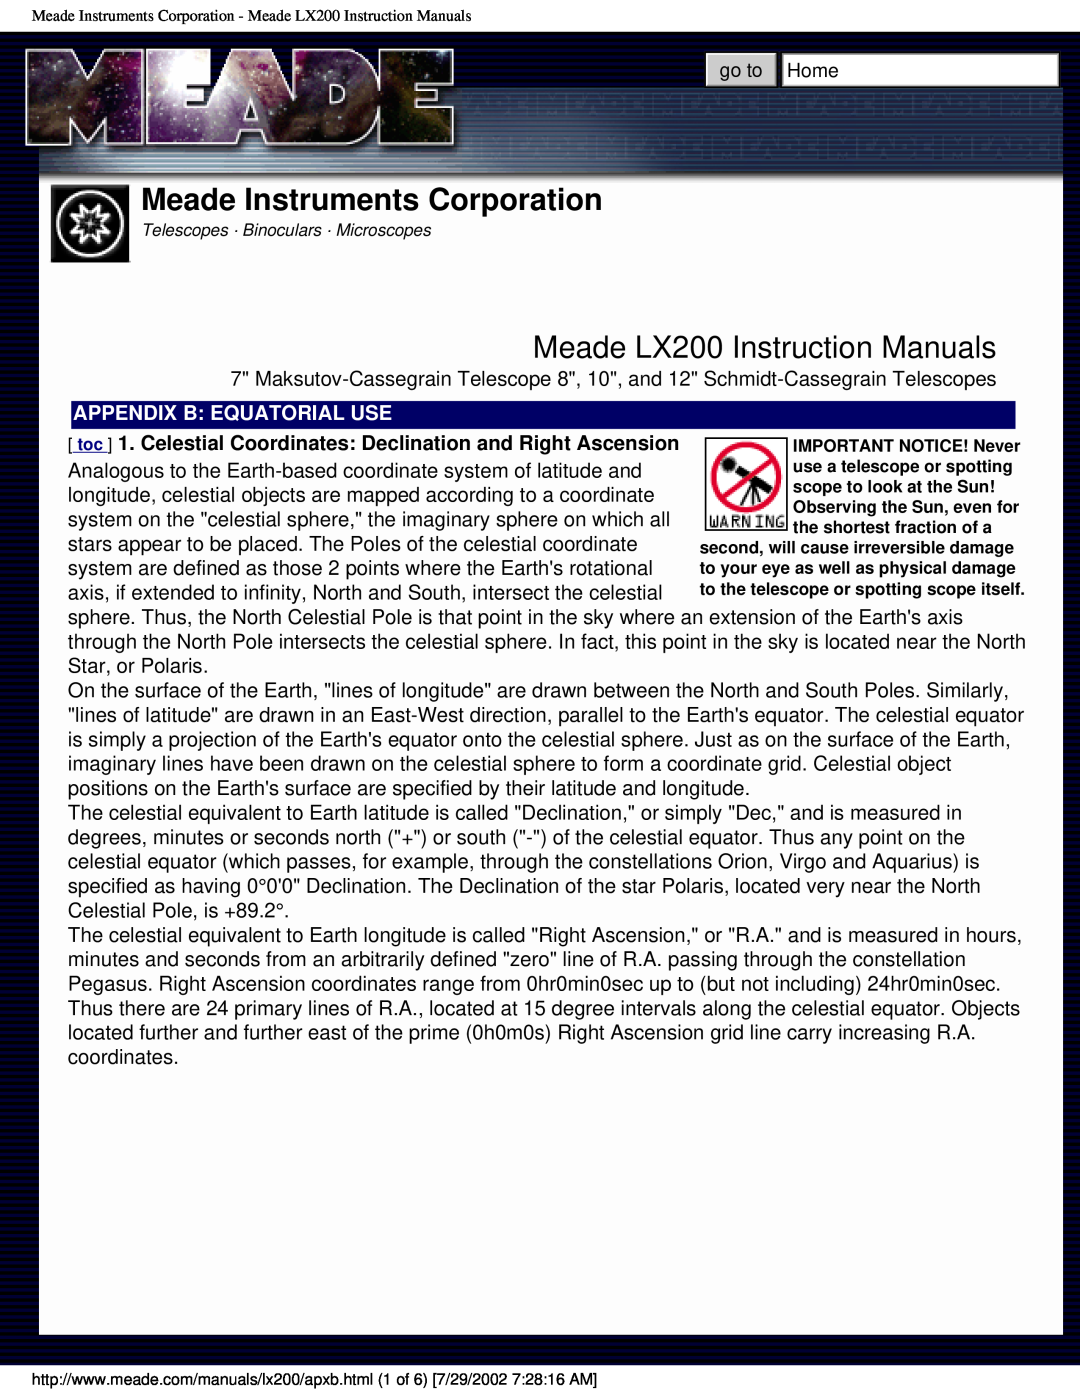 Meade instruction manual Meade Instruments Corporation, Meade LX200 Instruction Manuals, Appendix B: Equatorial Use 